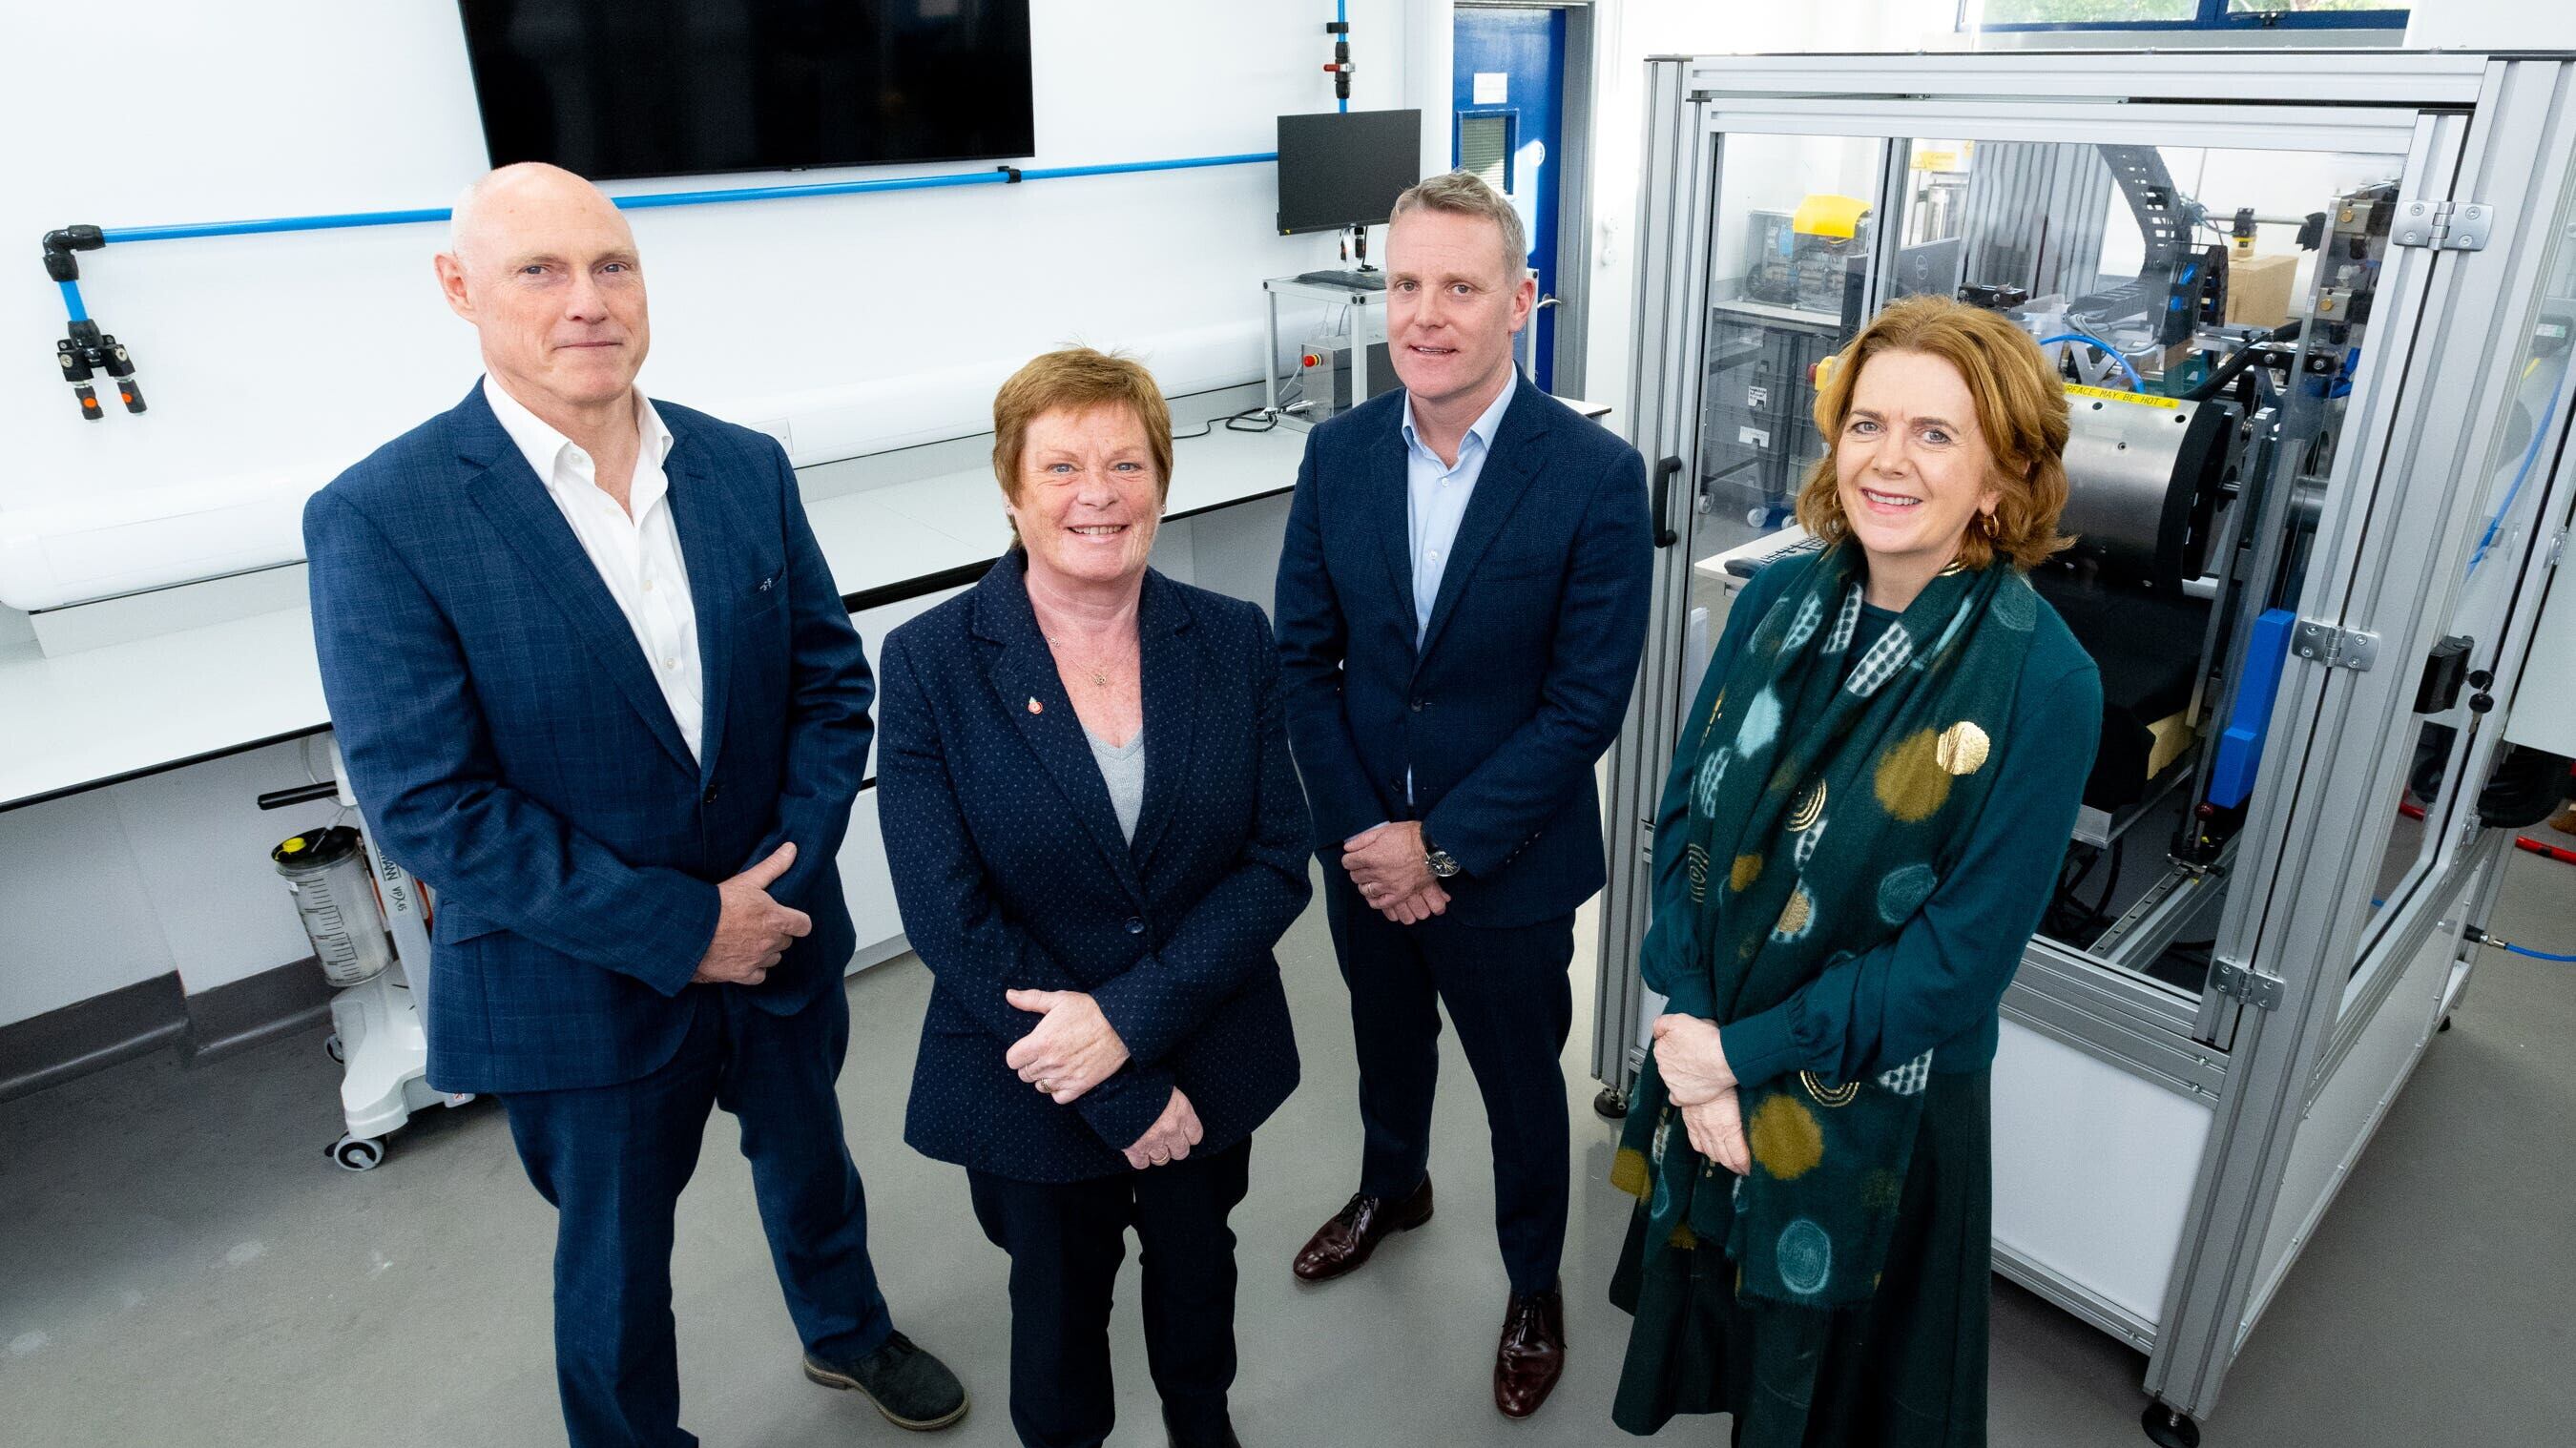 Dr Martin Crawford, Eakin Healthcare, Dr Vicky Kell, Invest Northern Ireland, Padraic Dempsey, Eakin, Mary McAllister, Eakin (Parkway Photography/PA)